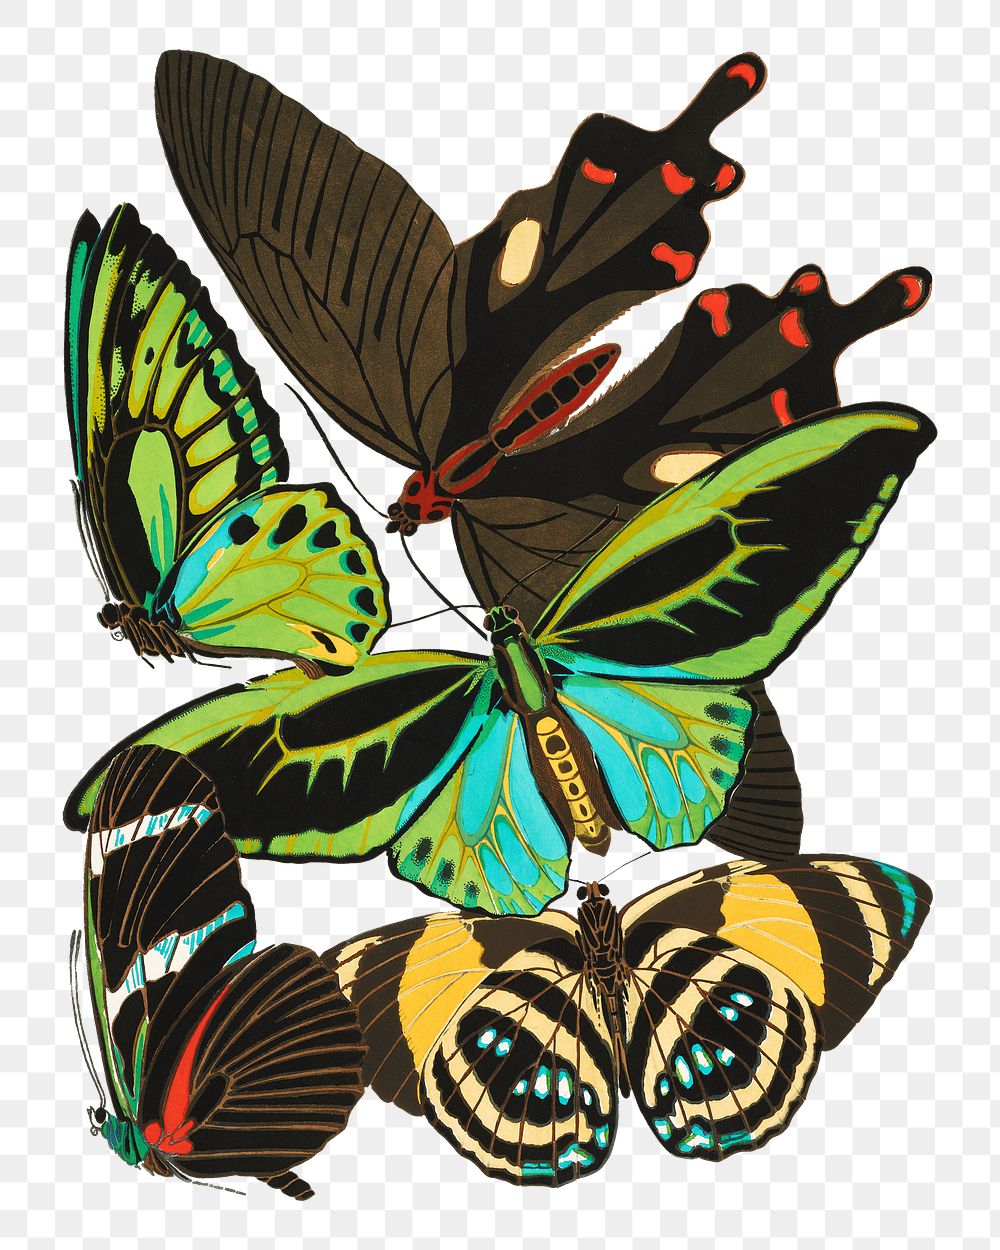 E.A. S&eacute;guy's Papillons png sticker, transparent background. Remixed by rawpixel